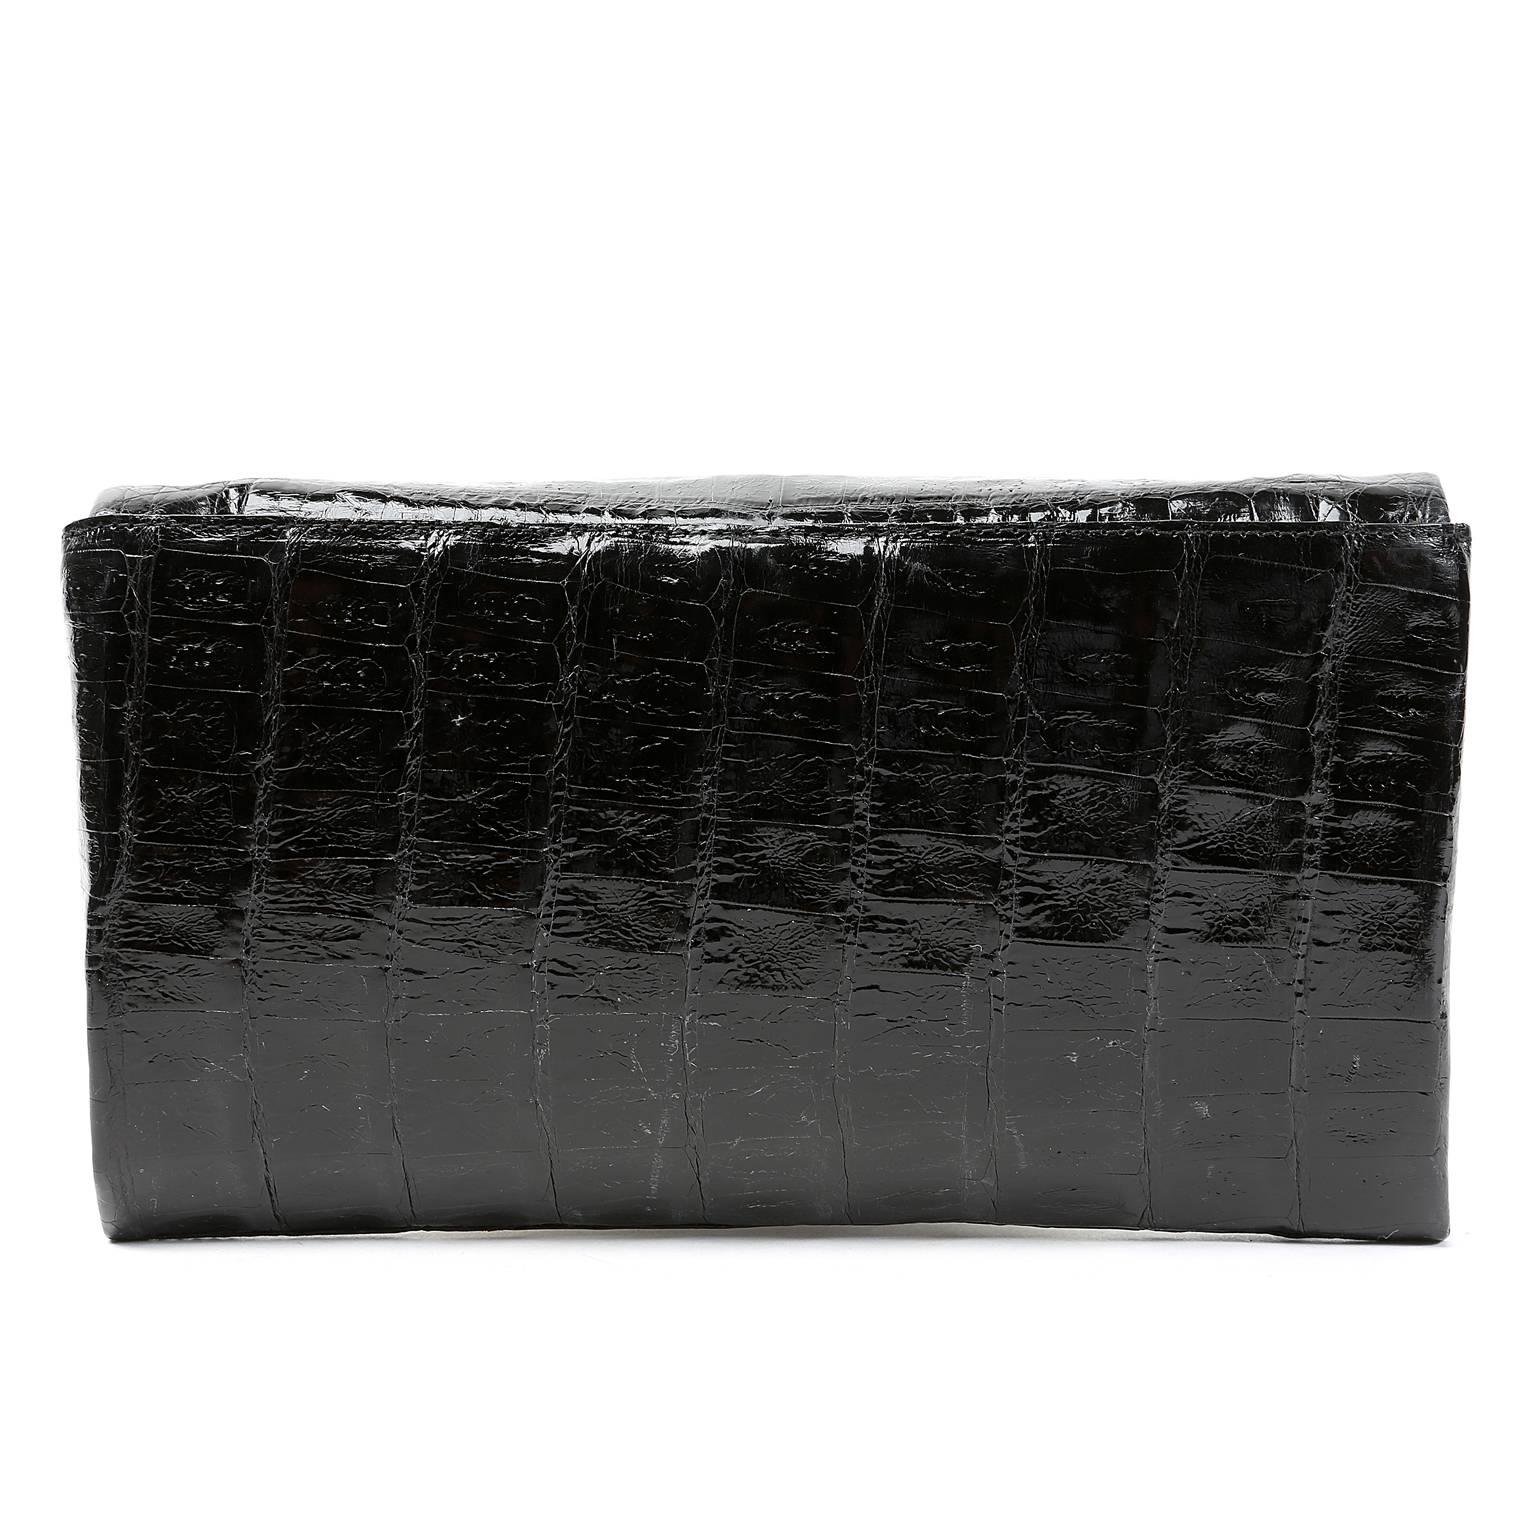 Nancy Gonzalez Black Crocodile Clutch- NEW
. Made from the finest skins, Nancy Gonzalez bags are highly collectible classics that always hold their value.
 
Sleek black glossy crocodile clutch is the perfect piece for any sophisticated wardrobe. 